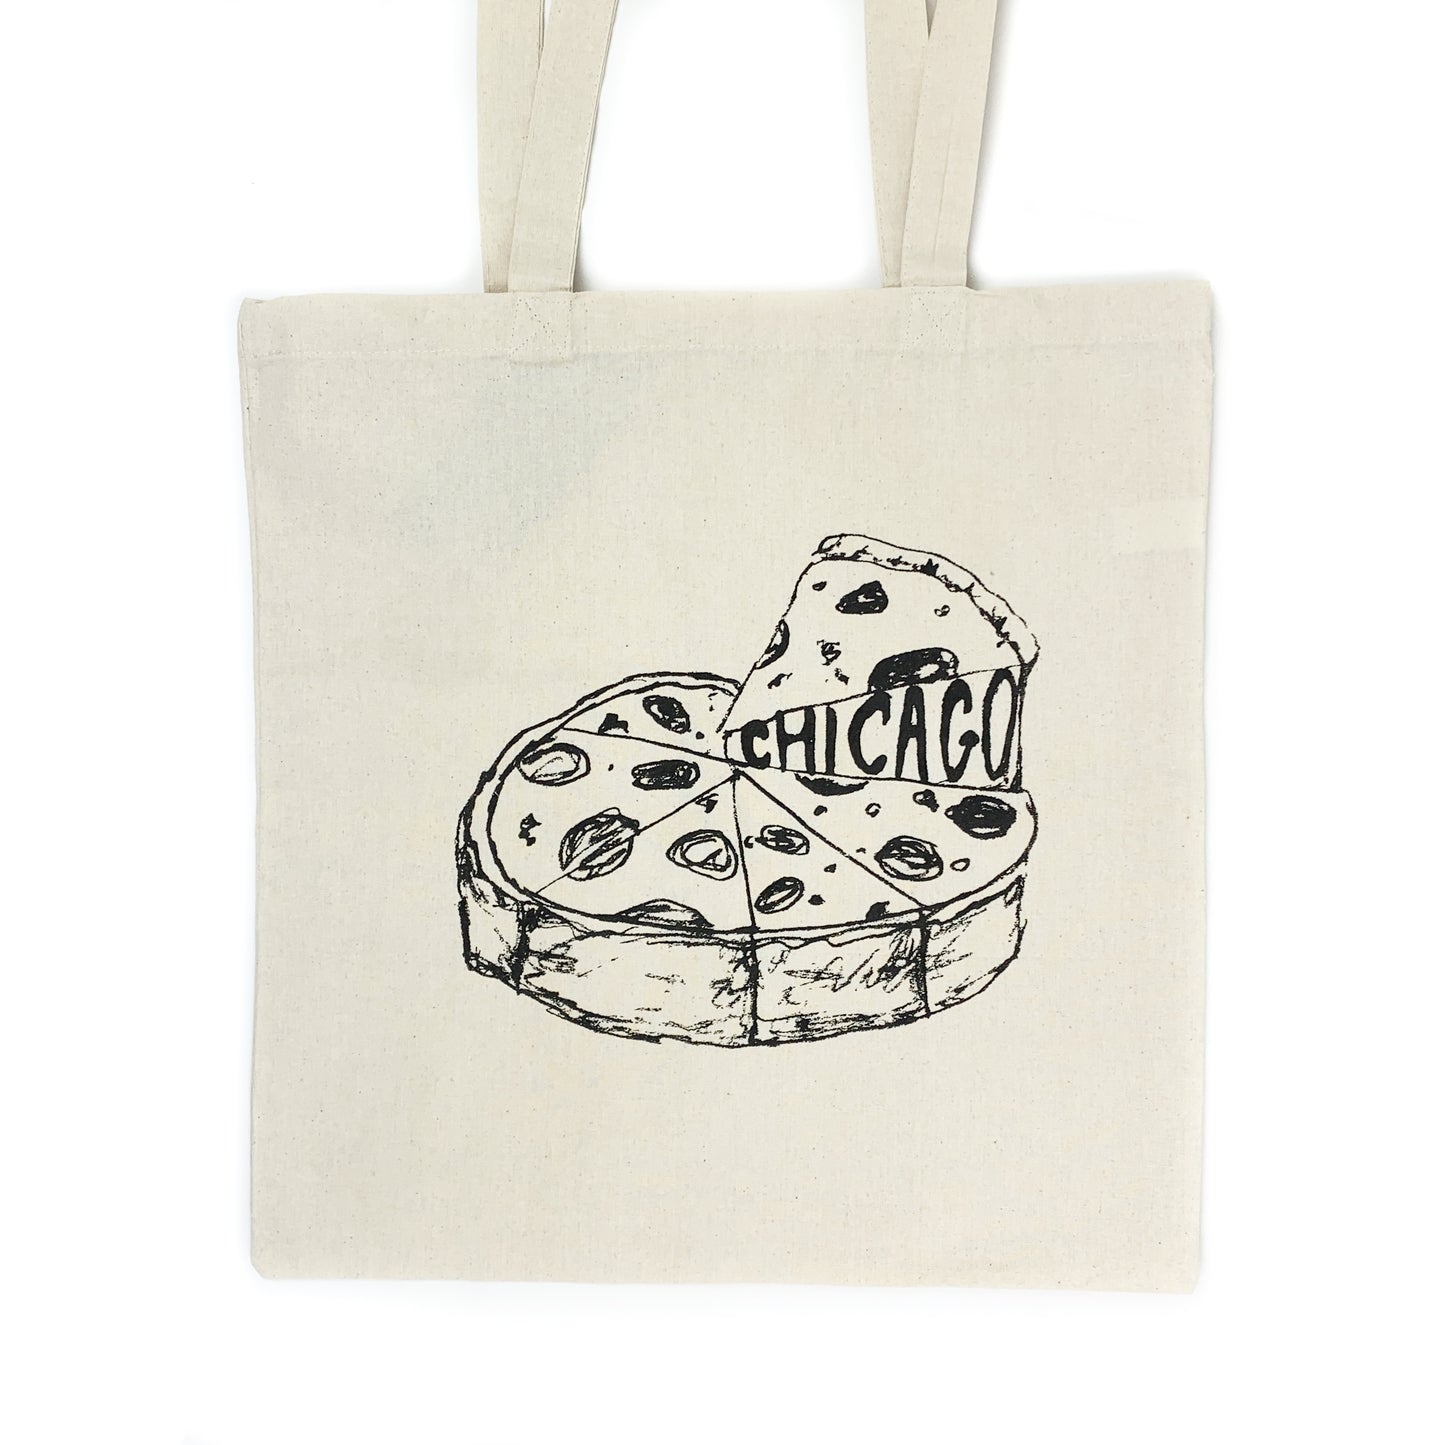 Chicago Deep Dish Pizza Tote Bag